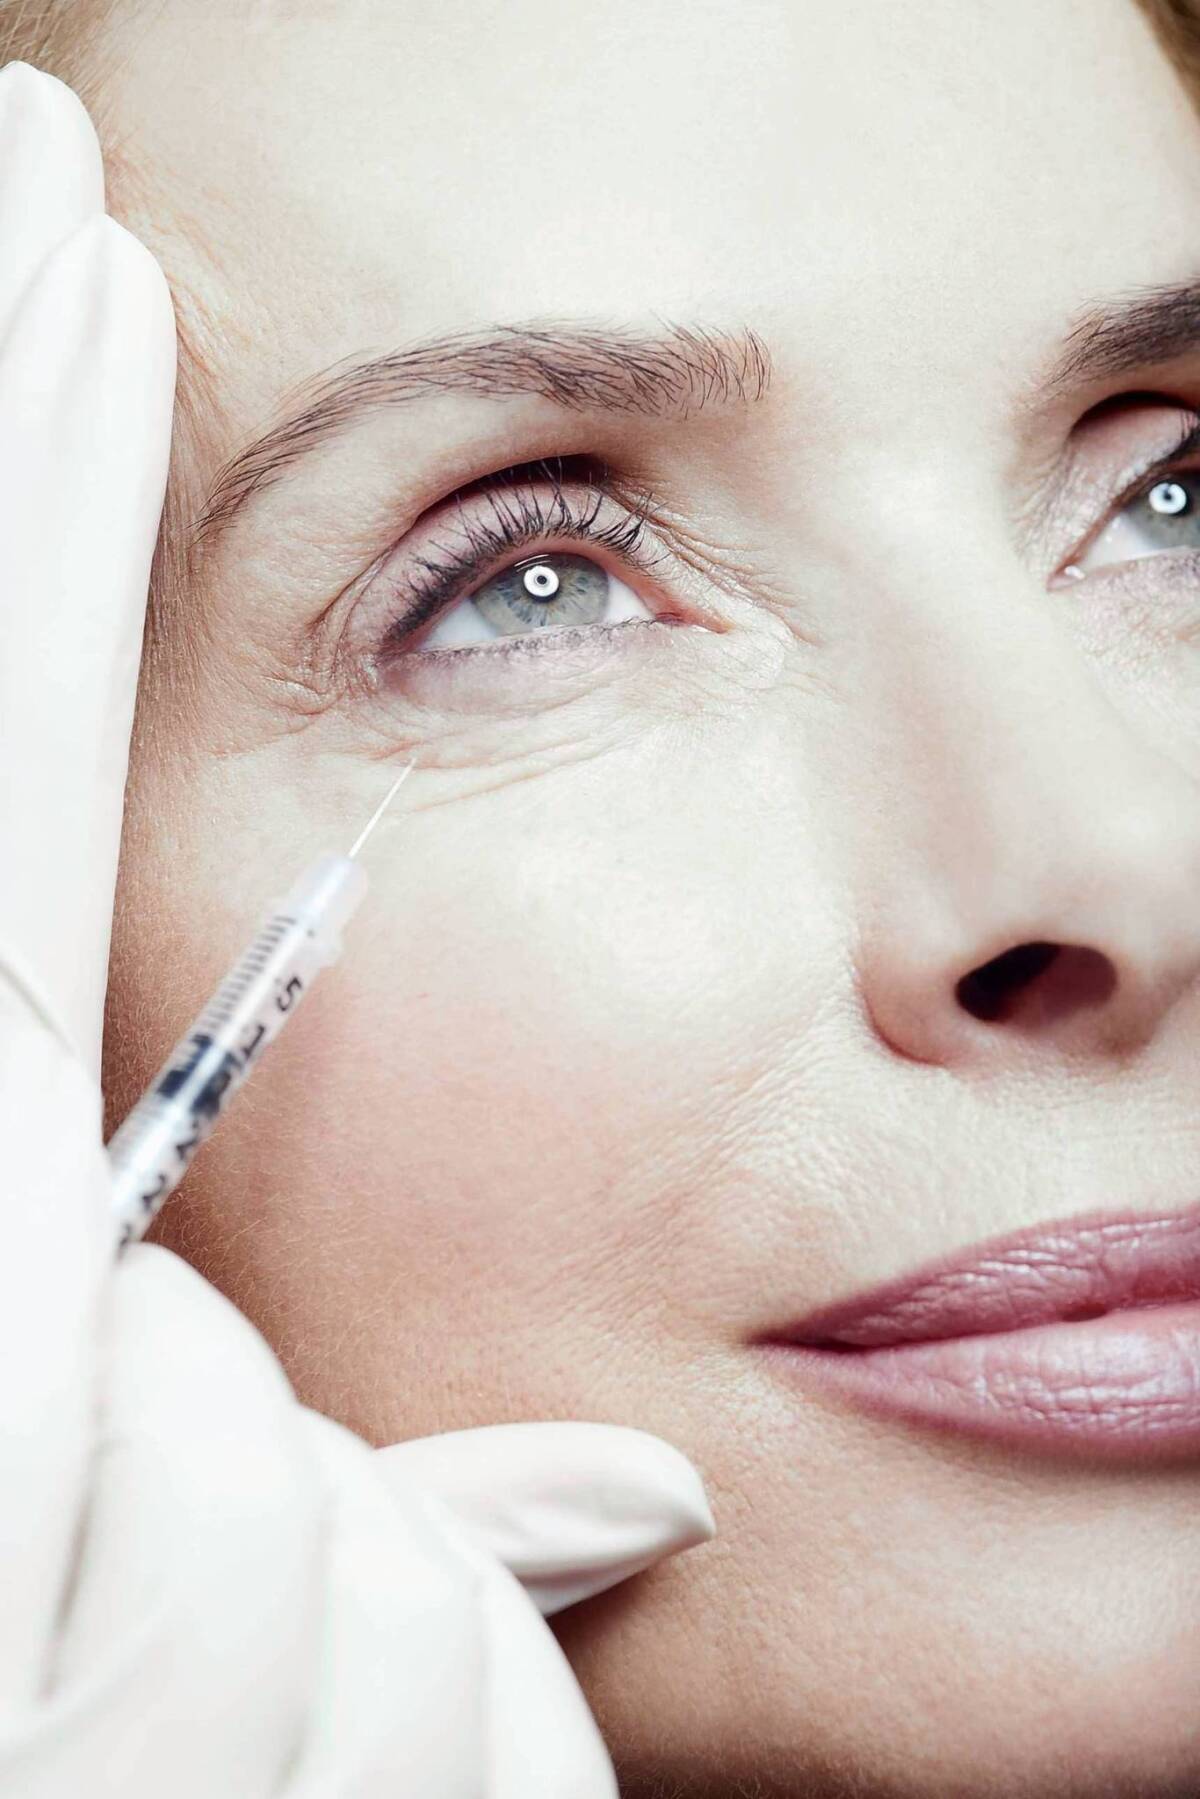 Botox is among the tools doctors use to make patients look younger.